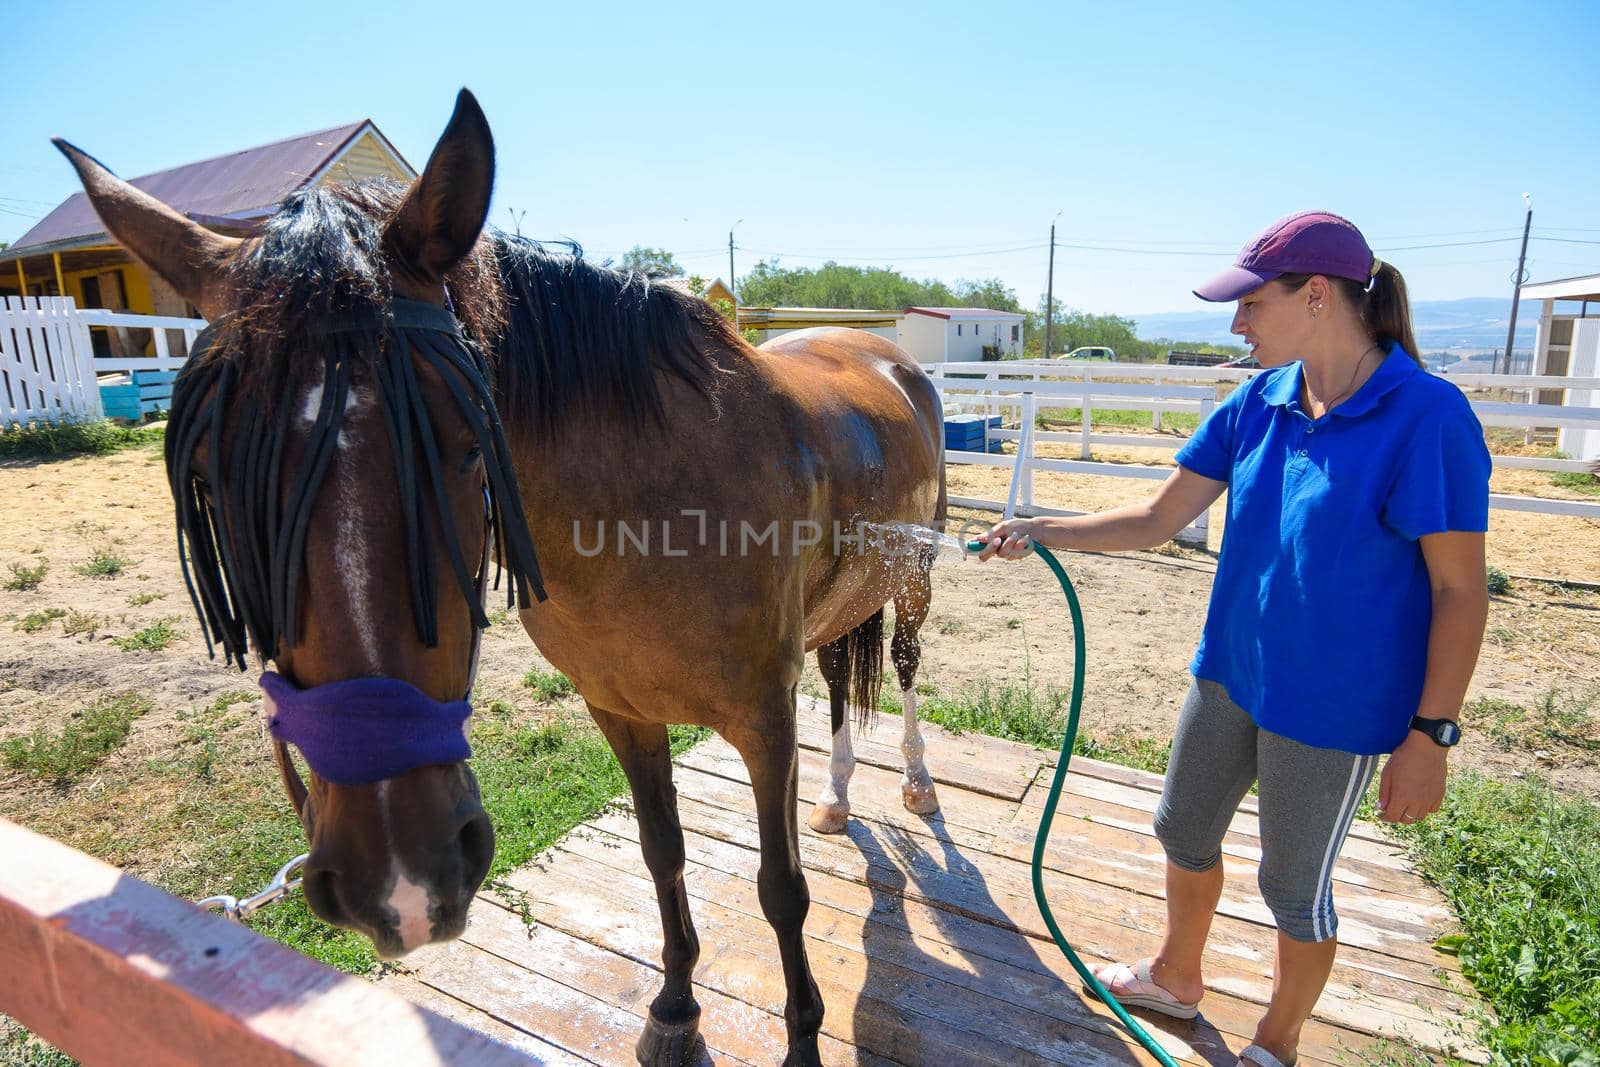 A girl pours water on a horse on a hot summer day